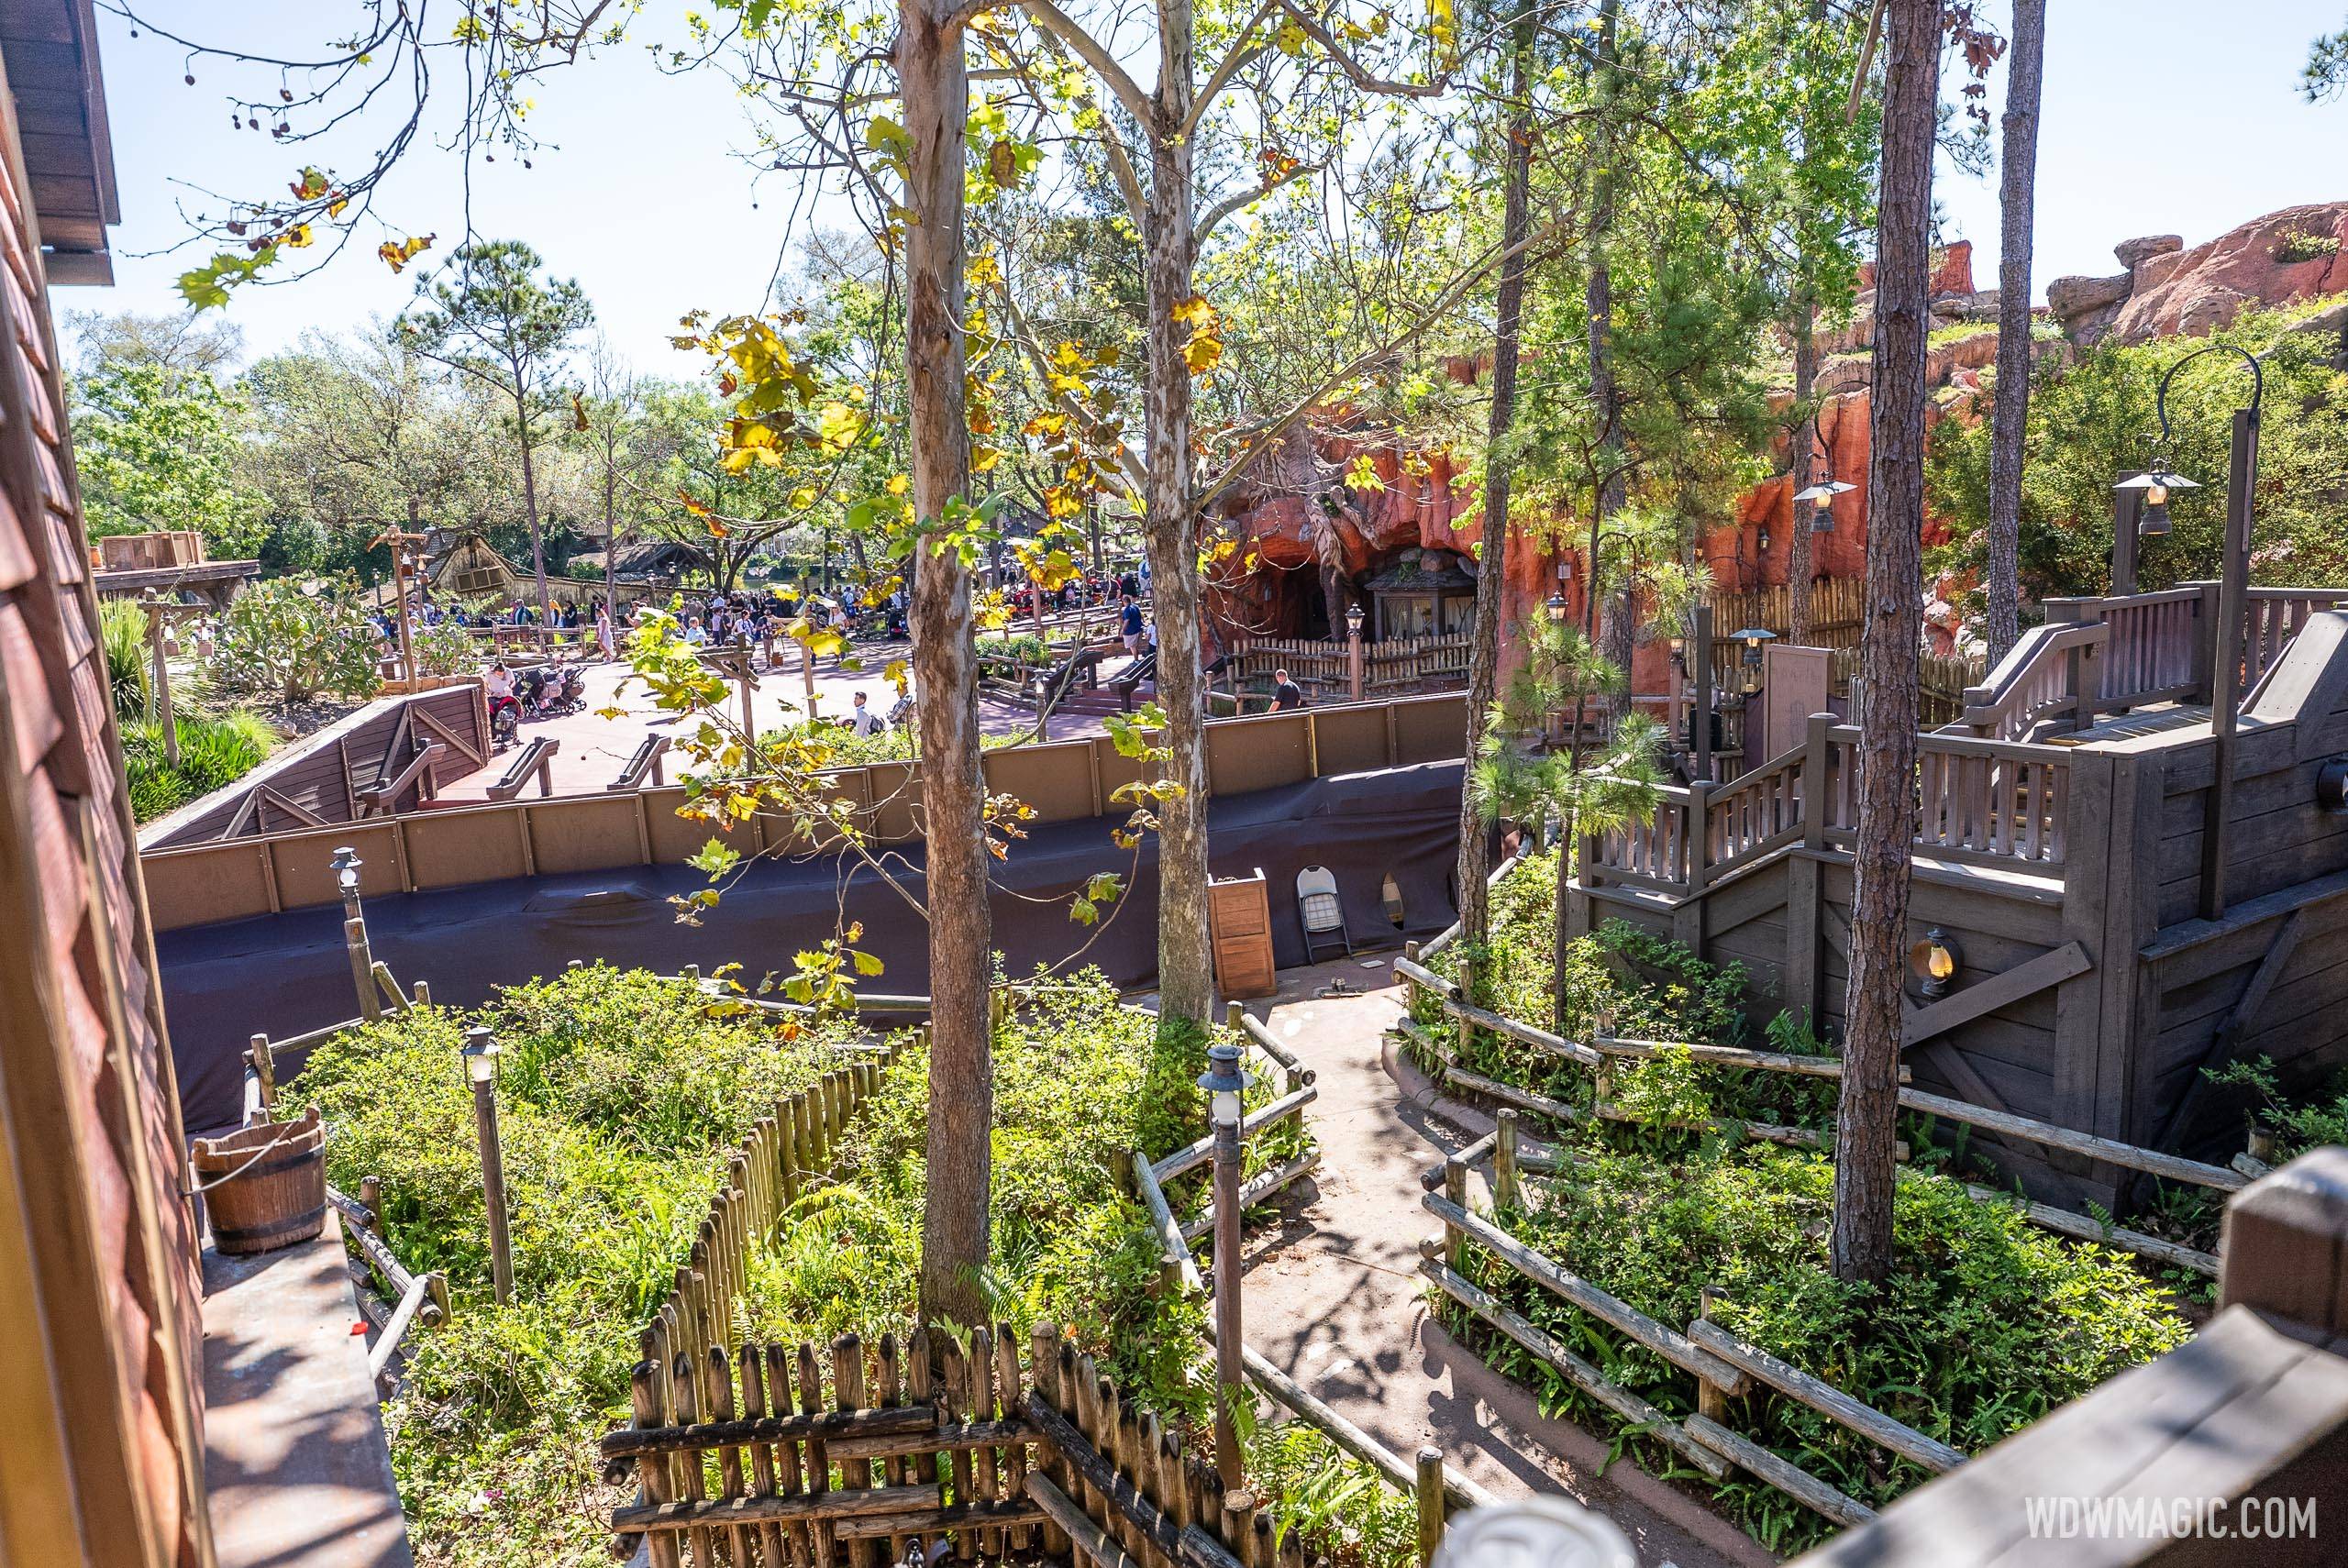 View from the Railroad station at the former Splash Mountain entrance